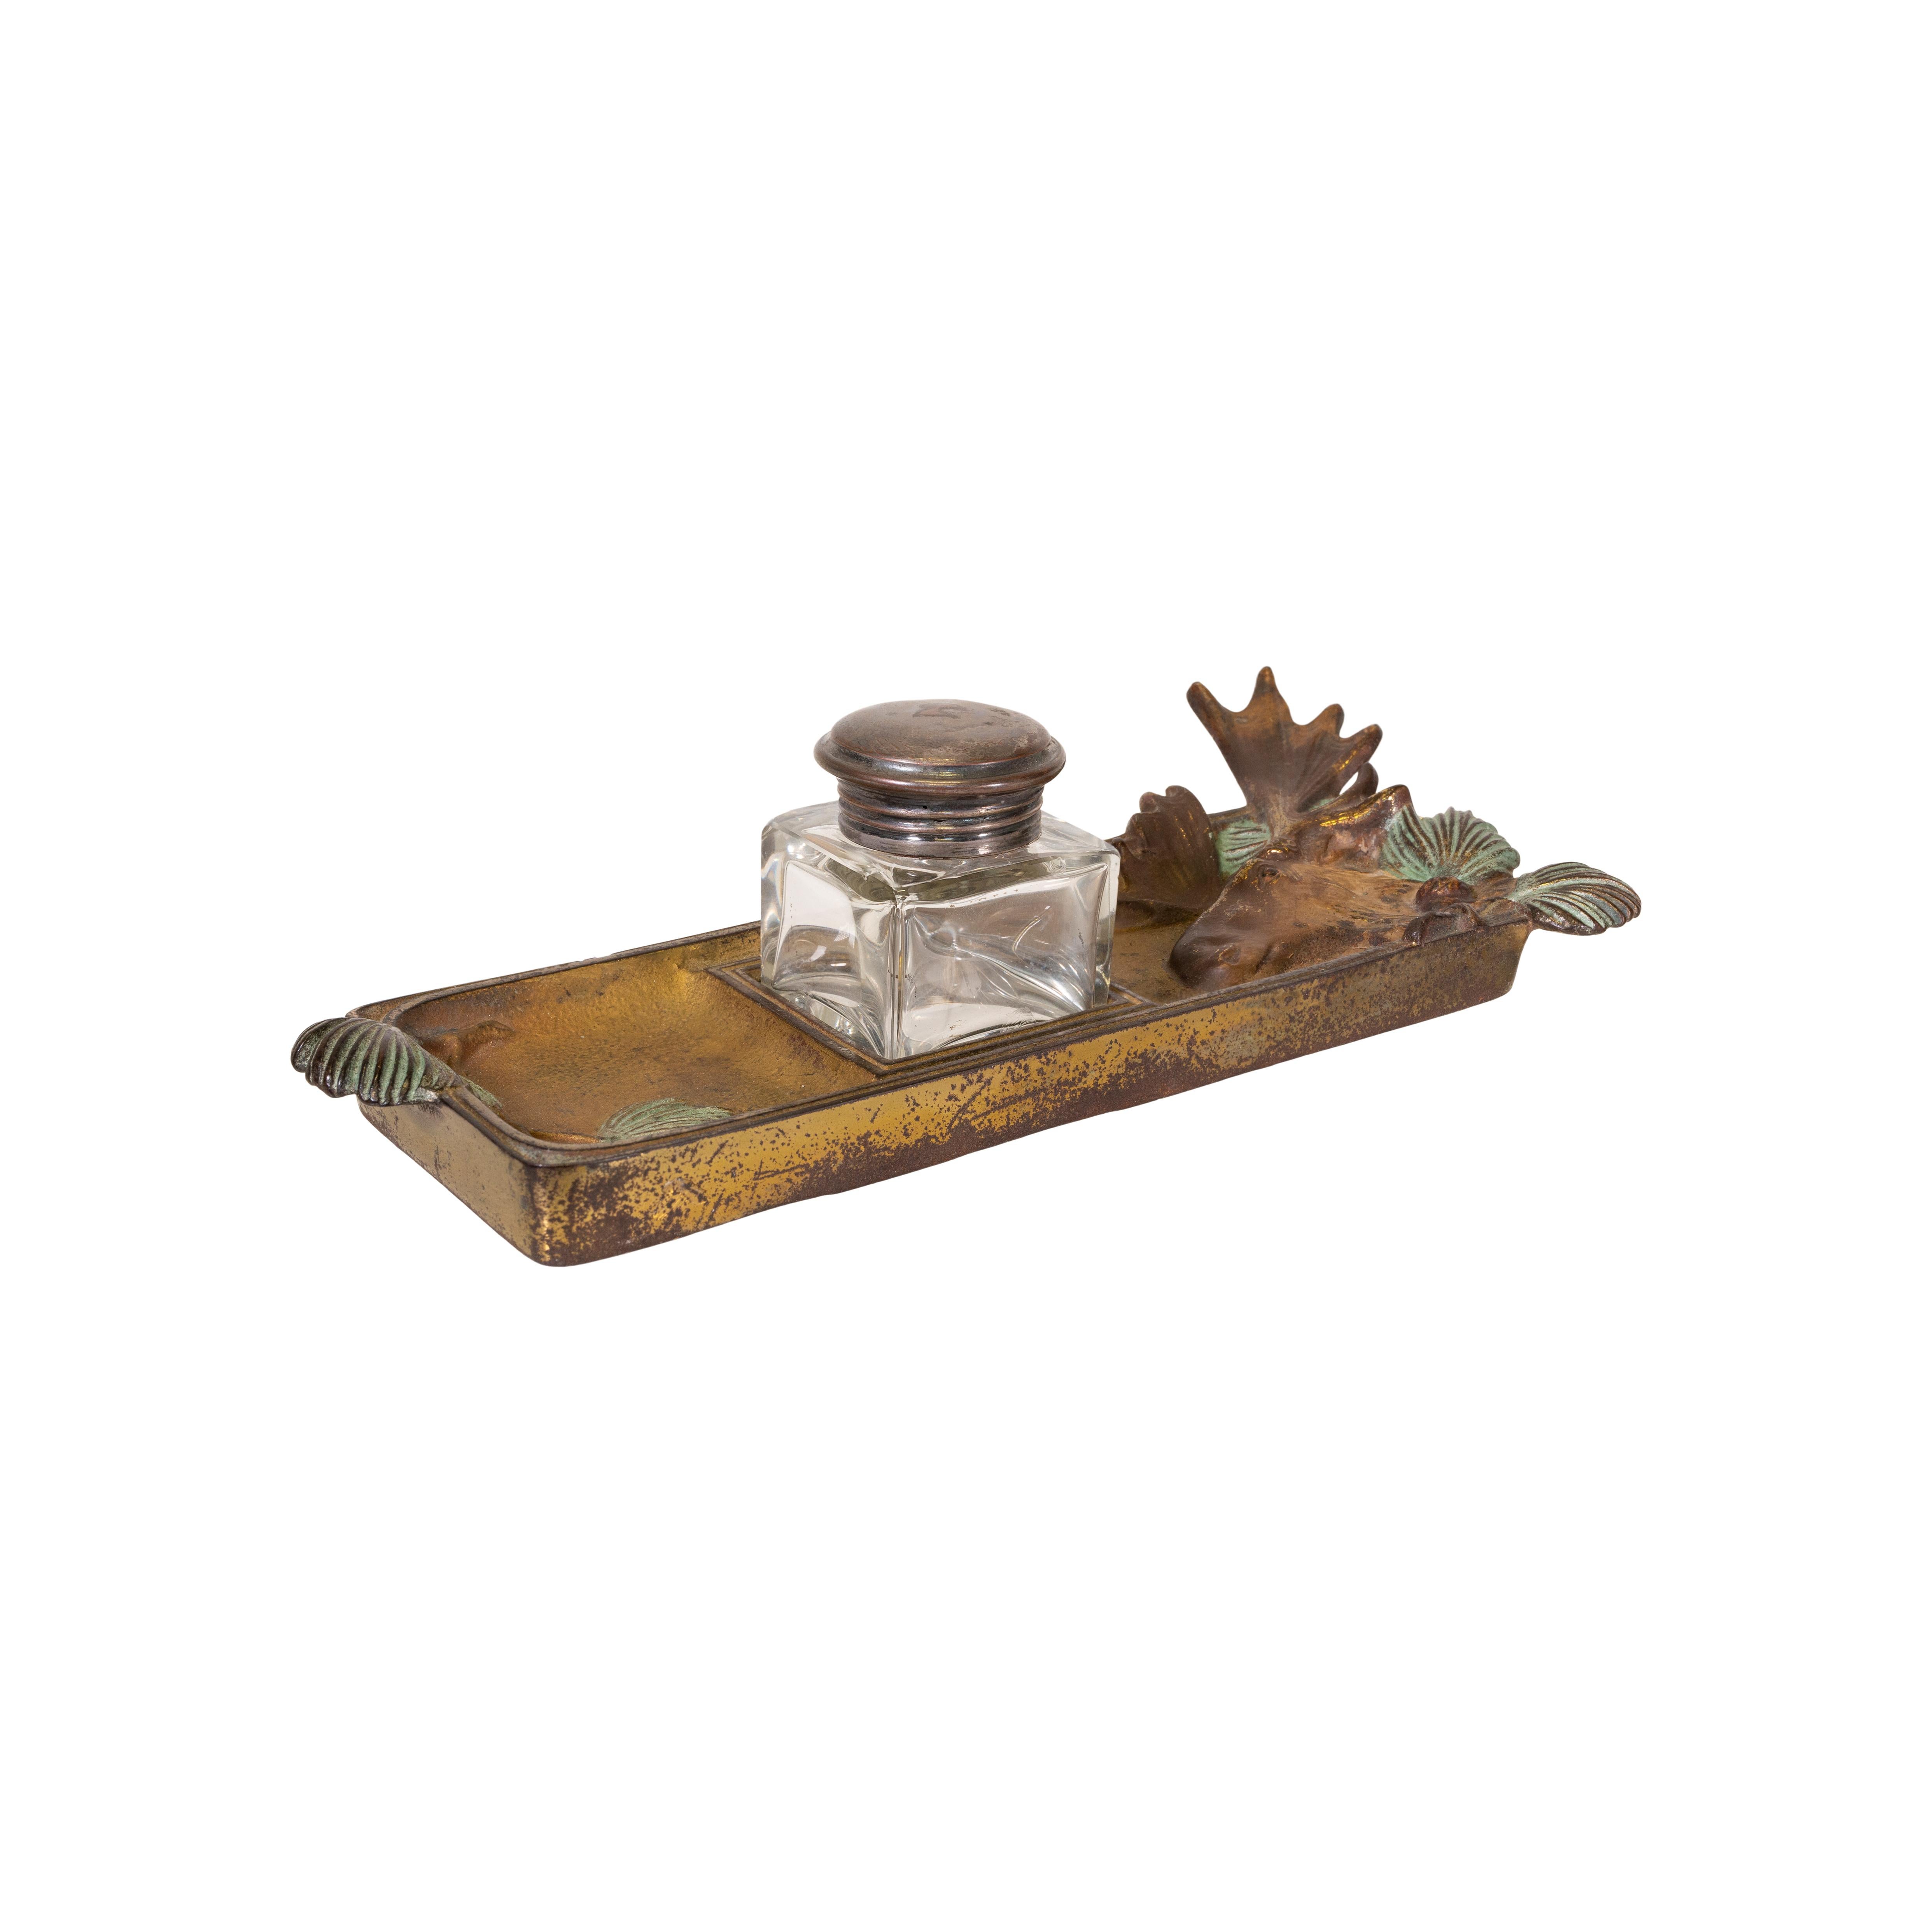 Neat gilded moose desk set with original inkwell, circa 1900. Made of cast iron with gold gilding. Neat collectors addition. Antique and unique. 

Period: circa 1900
Origin: United States
Size: 7